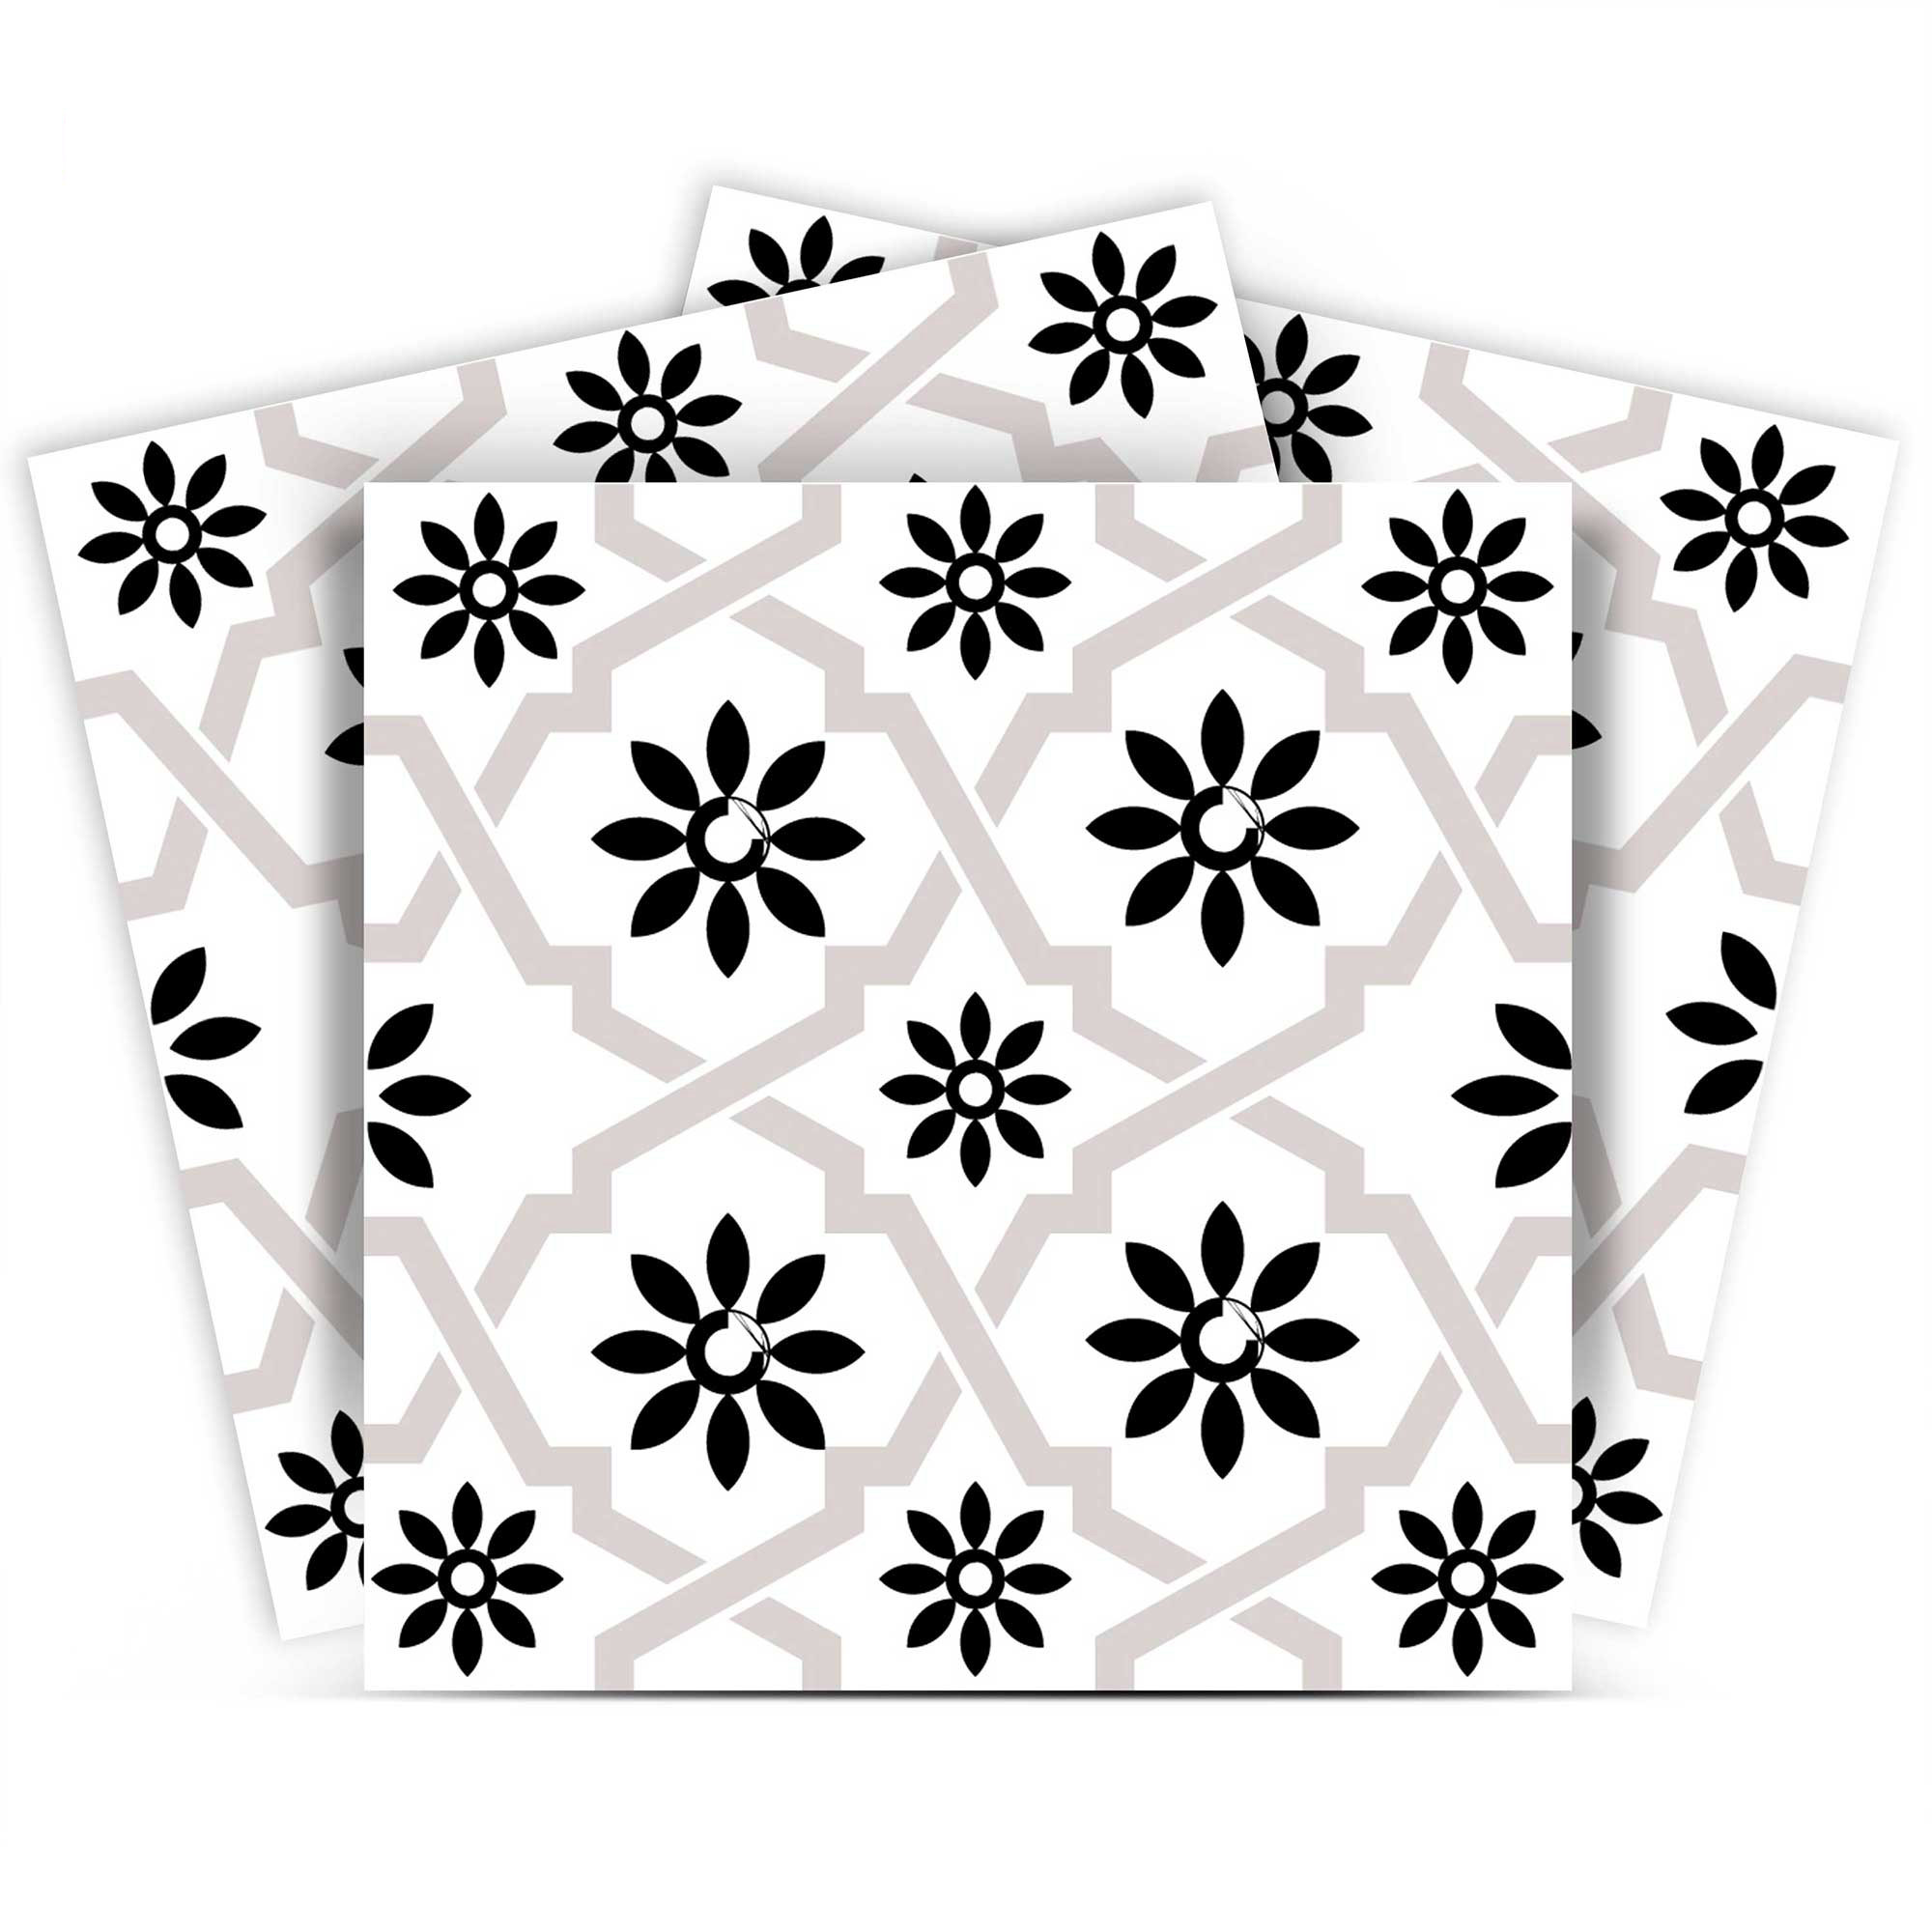 4" X 4" Black and White Lil Daisy Peel and Stick Removable Tiles-399905-1